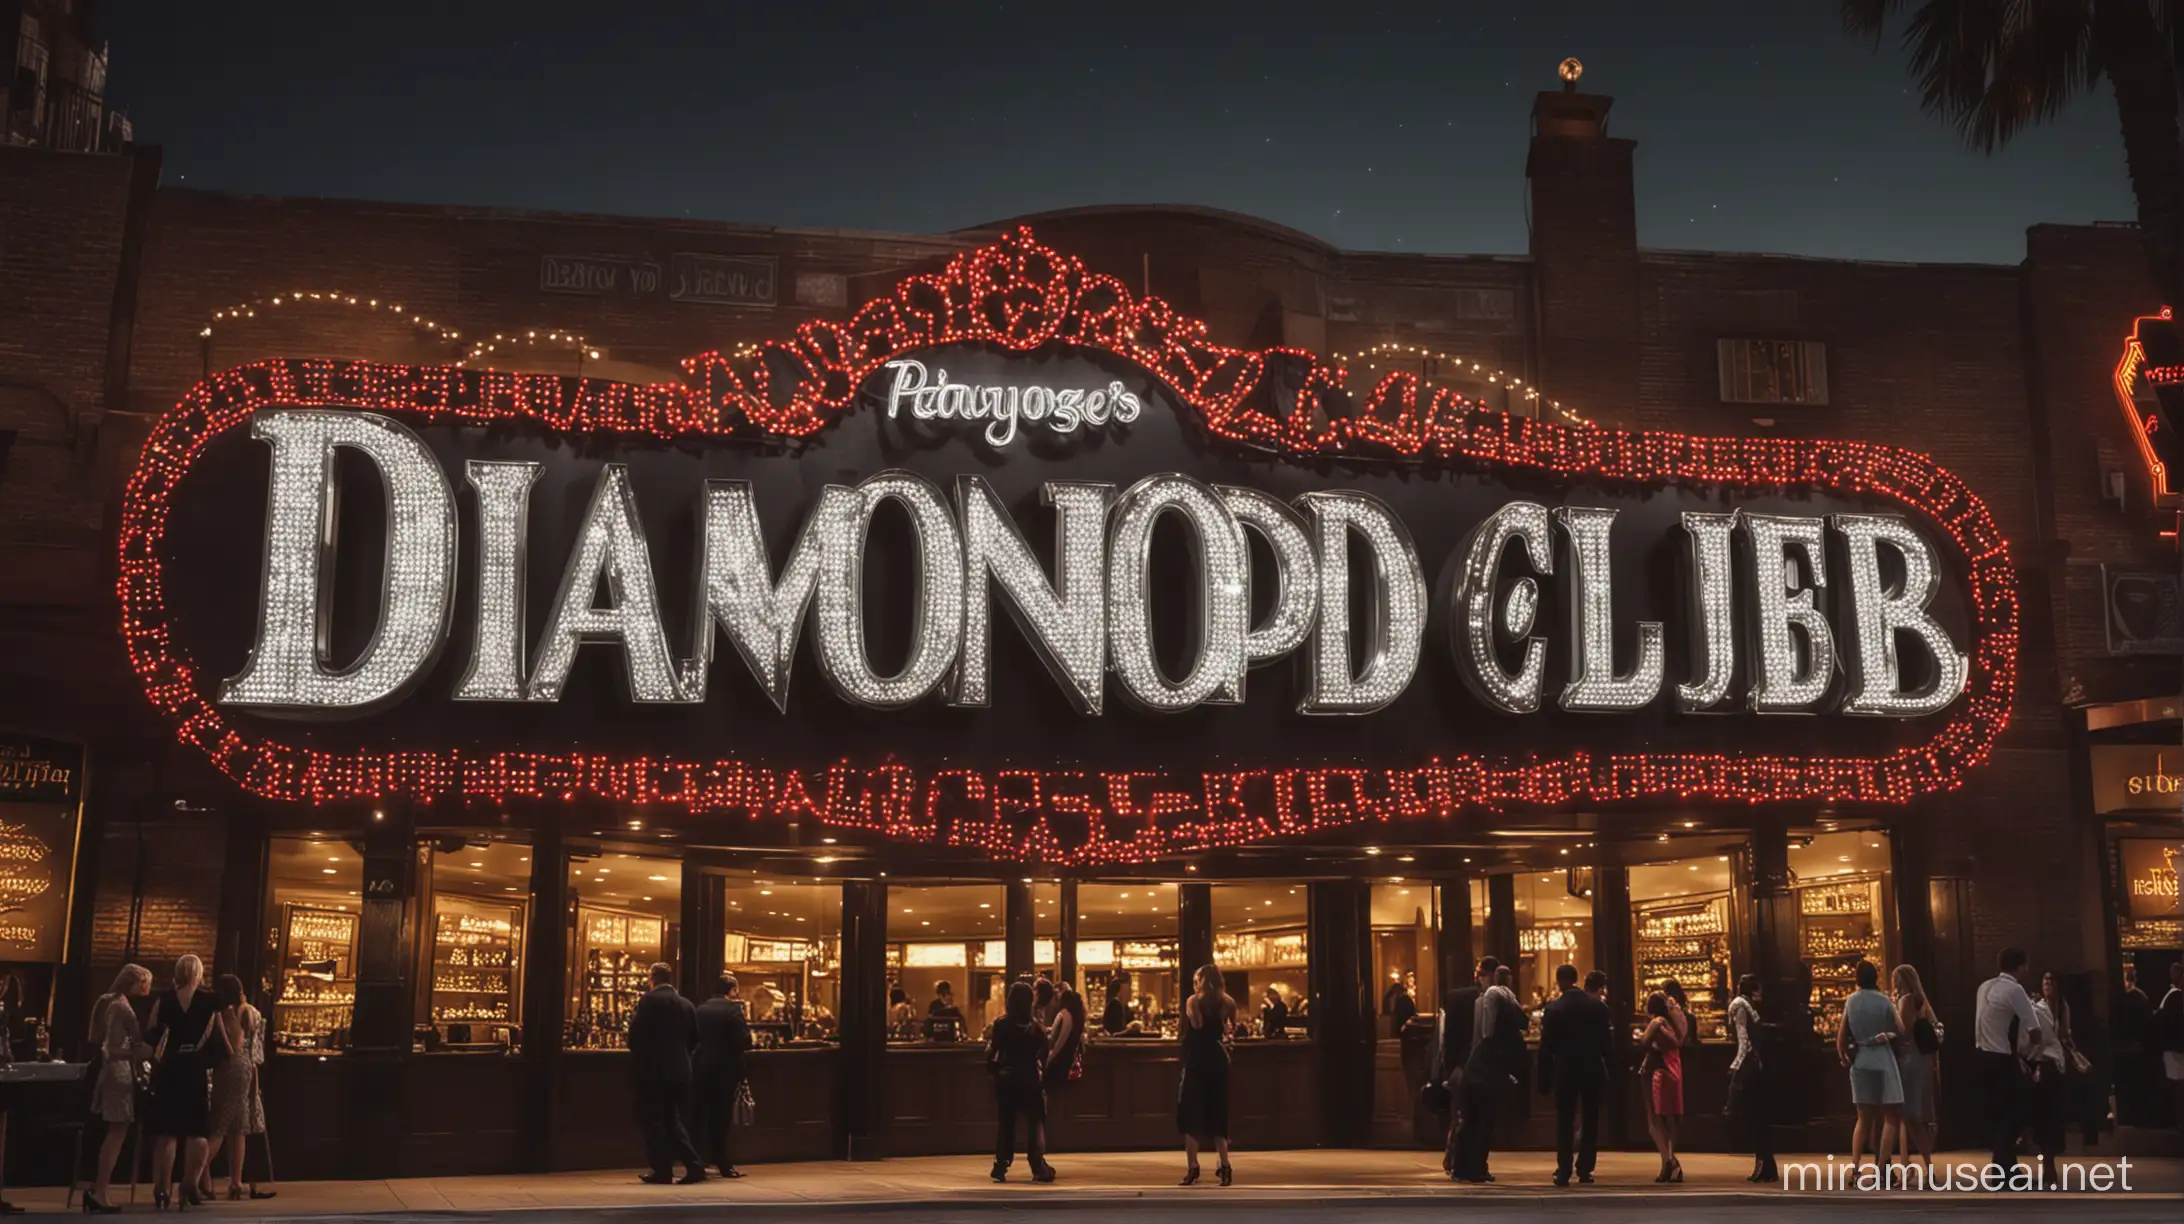 A striking 3D sign of "Diamond Club" stands at an impressive 3ft high by 50ft wide, illuminated by vibrant city lights. The sign's main feature is a large, sparkling diamond positioned right in the middle of the words. Flanking the sign on both sides are poker chips and cards, adding to the glamorous casino ambiance. Female silhouettes dressed in elegant attire can be seen in the background, enjoying the lively atmosphere and adding a touch of sophistication to the scene.

Magic Prompt

A captivating 3D rendering of a dazzling "Diamond Club" sign, standing at an imposing height of 3ft x 50ft. The illuminated sign glimmers with the vibrant city lights, drawing attention to the large, sparkling diamond placed right between the words. Poker chips and cards surround the sign, accentuating the glamorous casino atmosphere. In the background, the silhouettes of elegantly dressed women can be seen, enjoying the lively surroundings and exuding an air of sophistication and excitement.